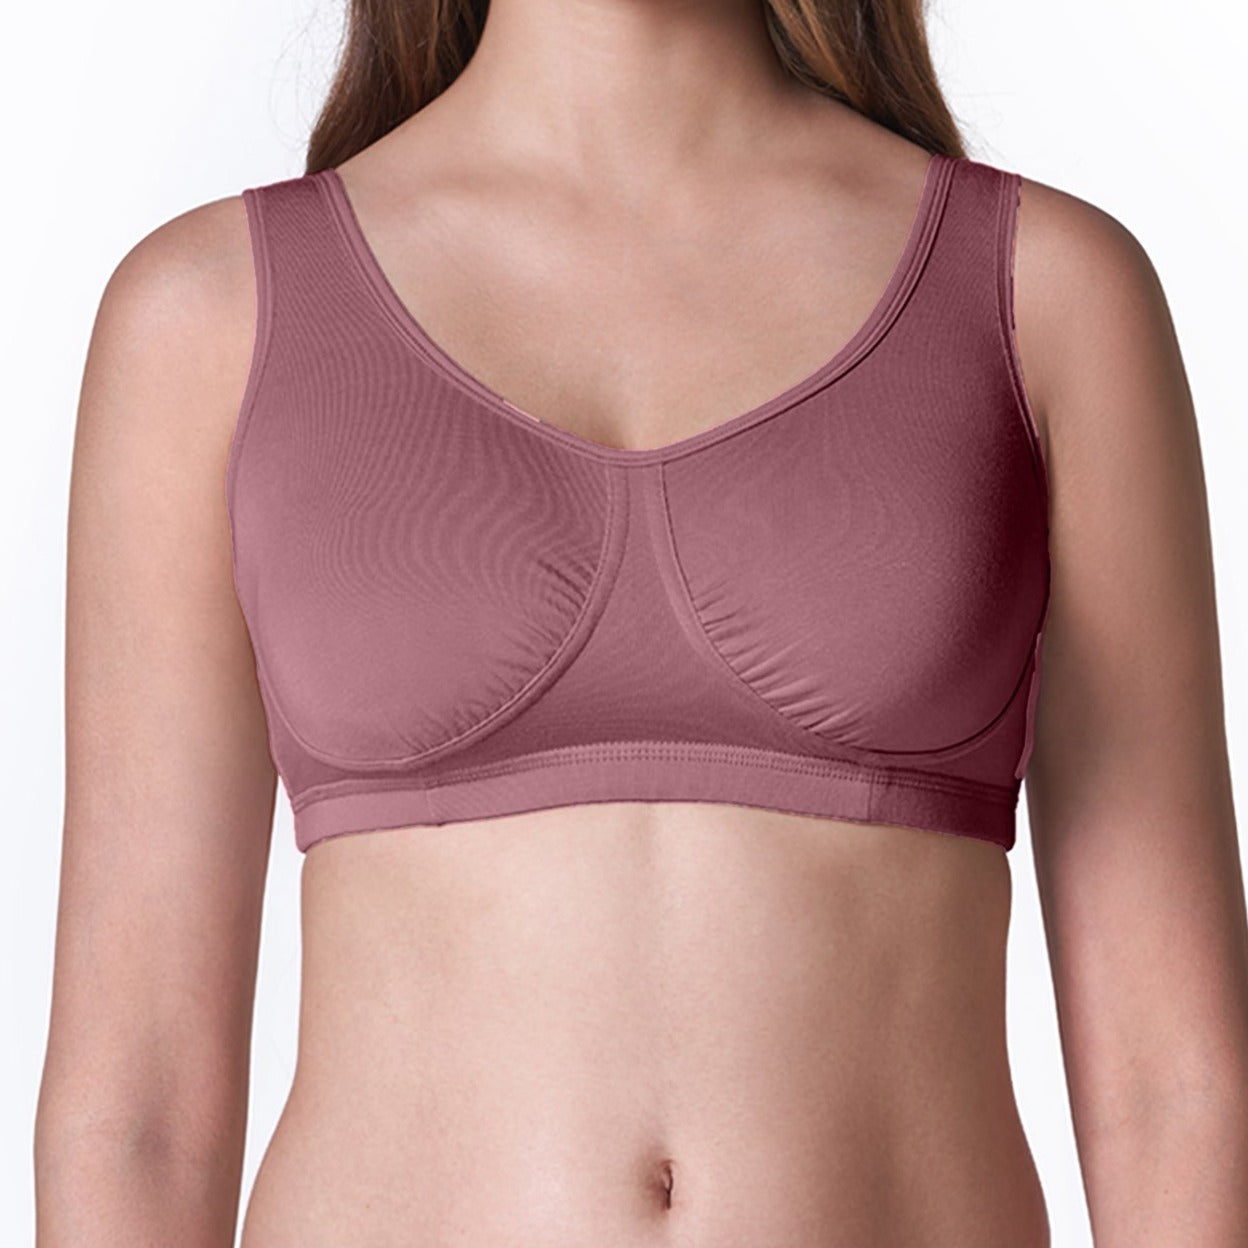 Blossom Inners - Introducing Night Bra! Crafted to enhance ease and  relaxation, Made with the softest modal fabric, which is breathable, shrink  resistant and extra soft. It is wire-free with soft broad